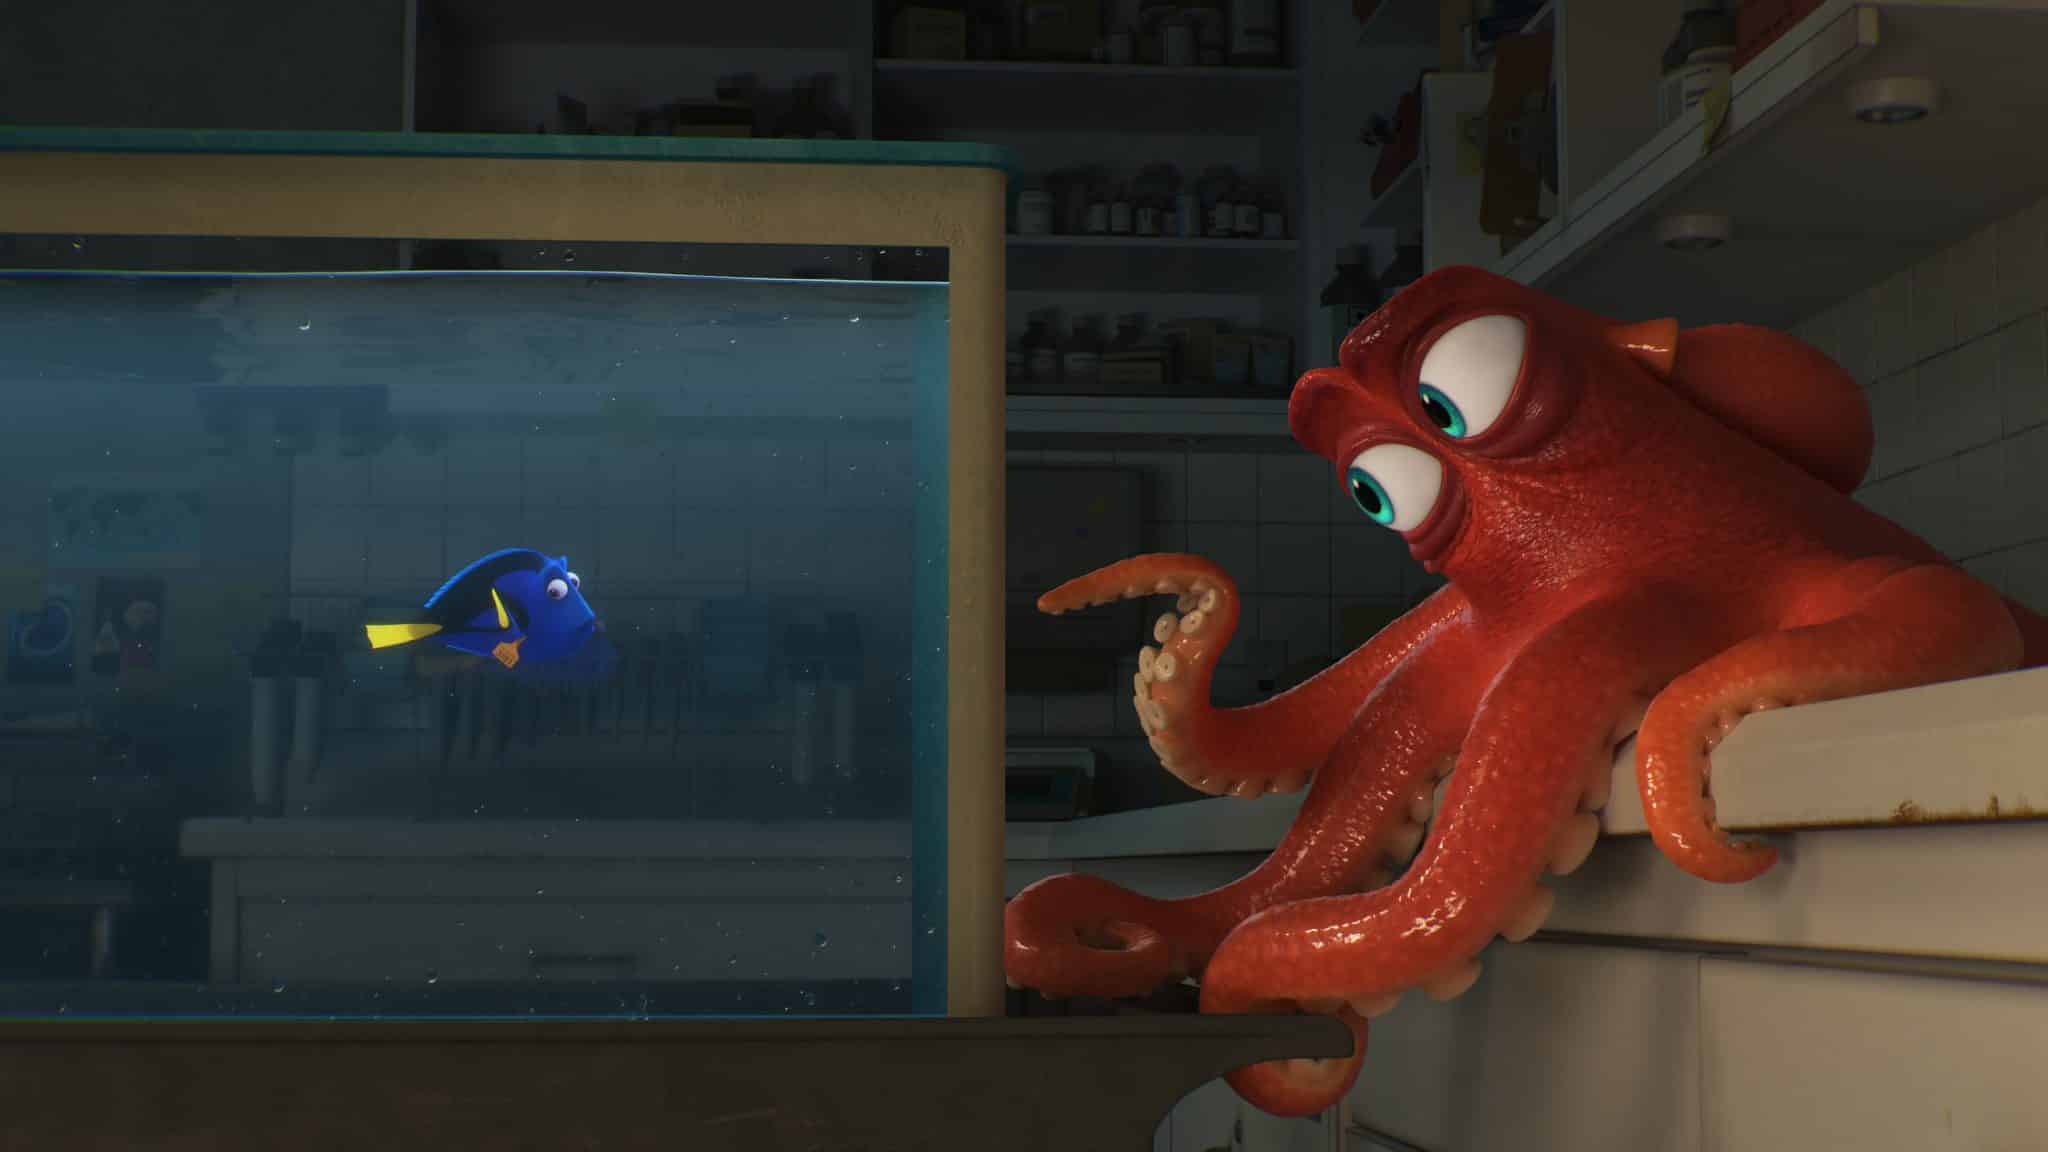 DO I KNOW YOU? -- In Disney?Pixar's "Finding Dory," everyone's favorite forgetful blue tang, Dory (voice of Ellen DeGeneres), encounters an array of new?and old?acquaintances, including a cantankerous octopus named Hank (voice of Ed O'Neill). Directed by Andrew Stanton (?Finding Nemo,? ?WALL?E?) and produced by Lindsey Collins (co-producer ?WALL?E?), ?Finding Dory? swims into theaters June 17, 2016.